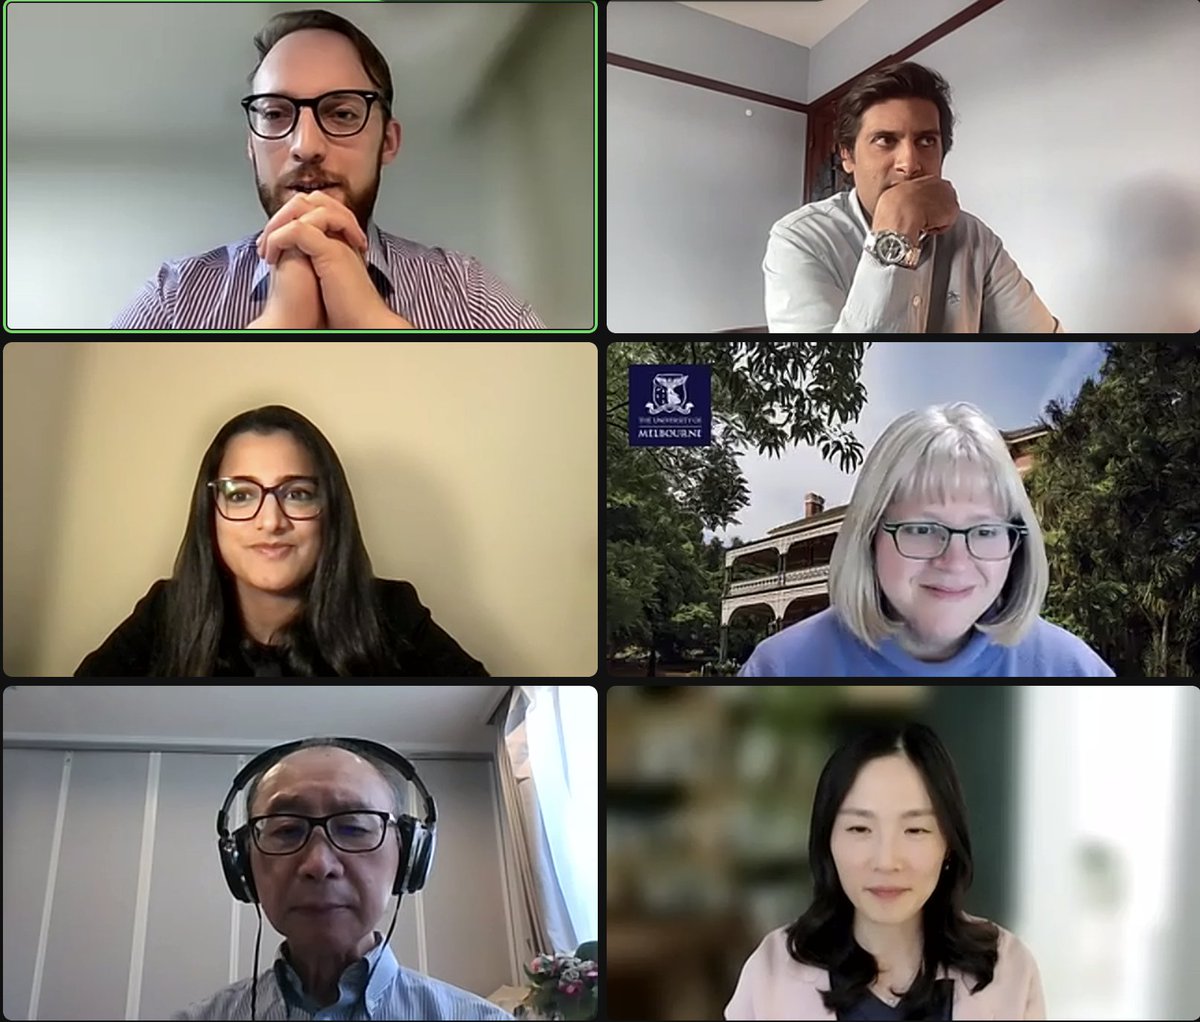 We're getting started on our webinar to launch our latest report on Asia-Pacific flashpoints and perceptions of strategic risk! Join us ➡️ shorturl.at/0OXHm